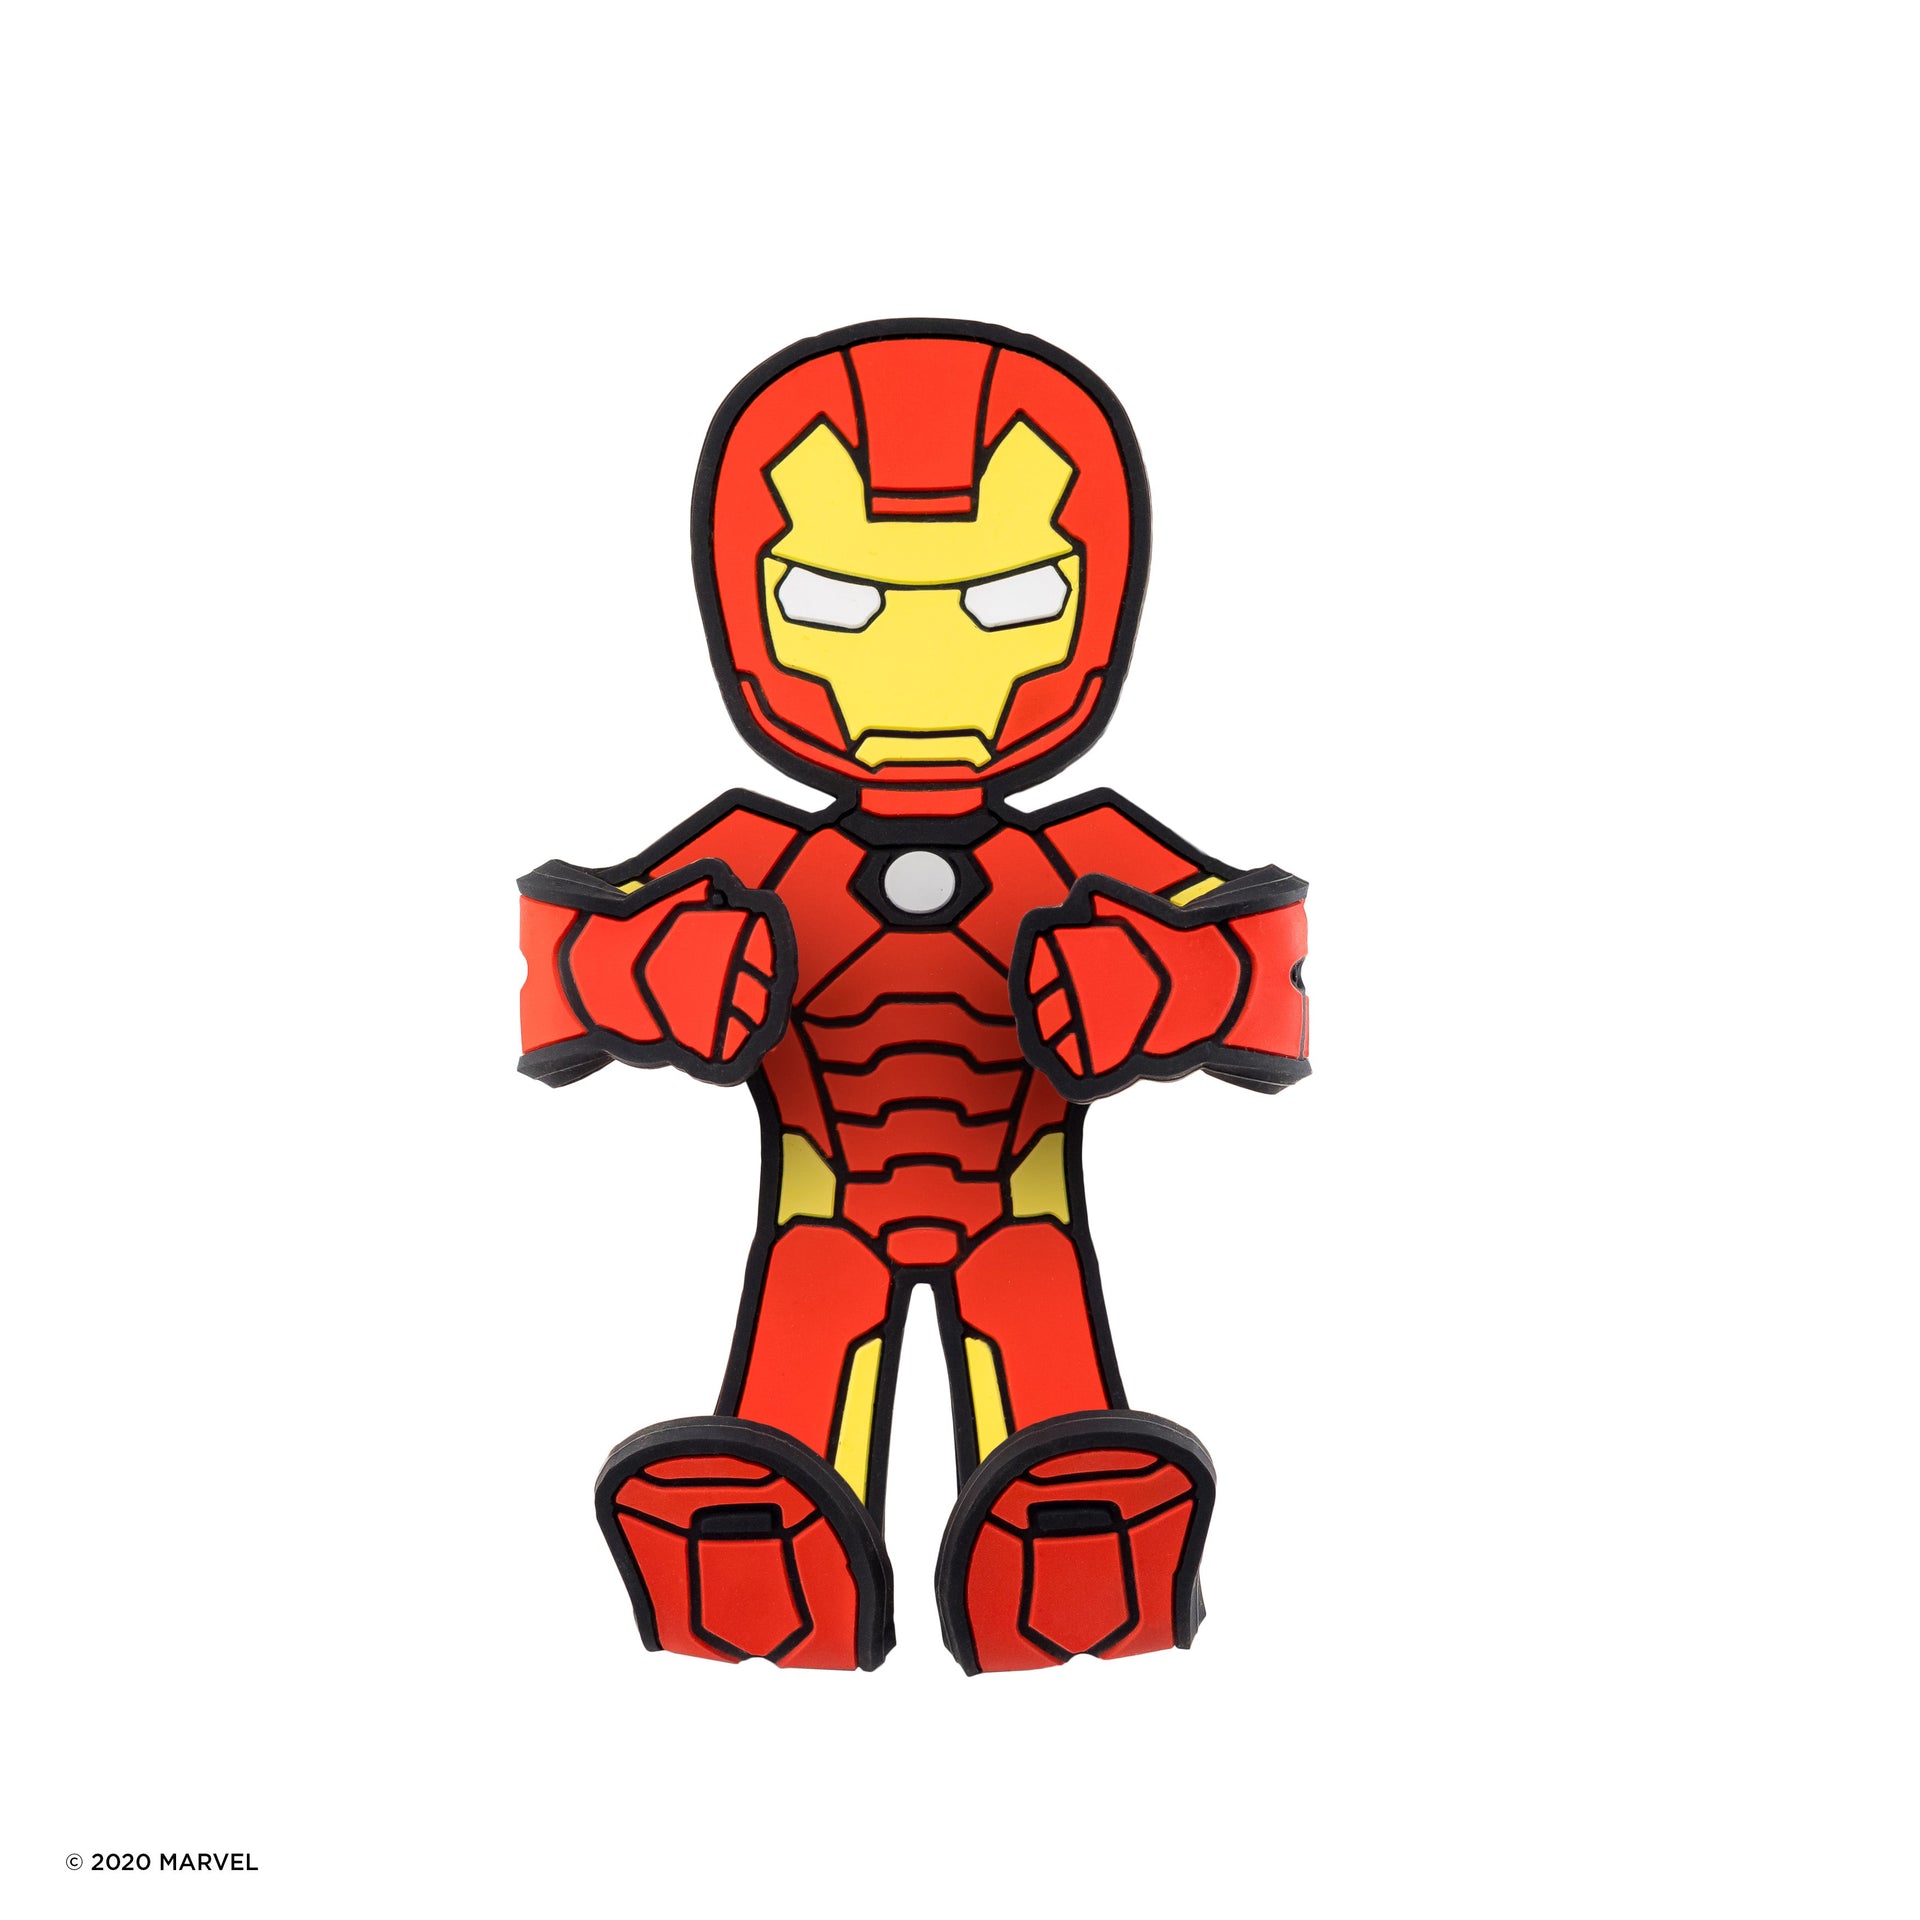 Image of Marvel Comics Iron Man Hug Buddy with arms and legs in the folded closed position ready to hold your phone, on a white background